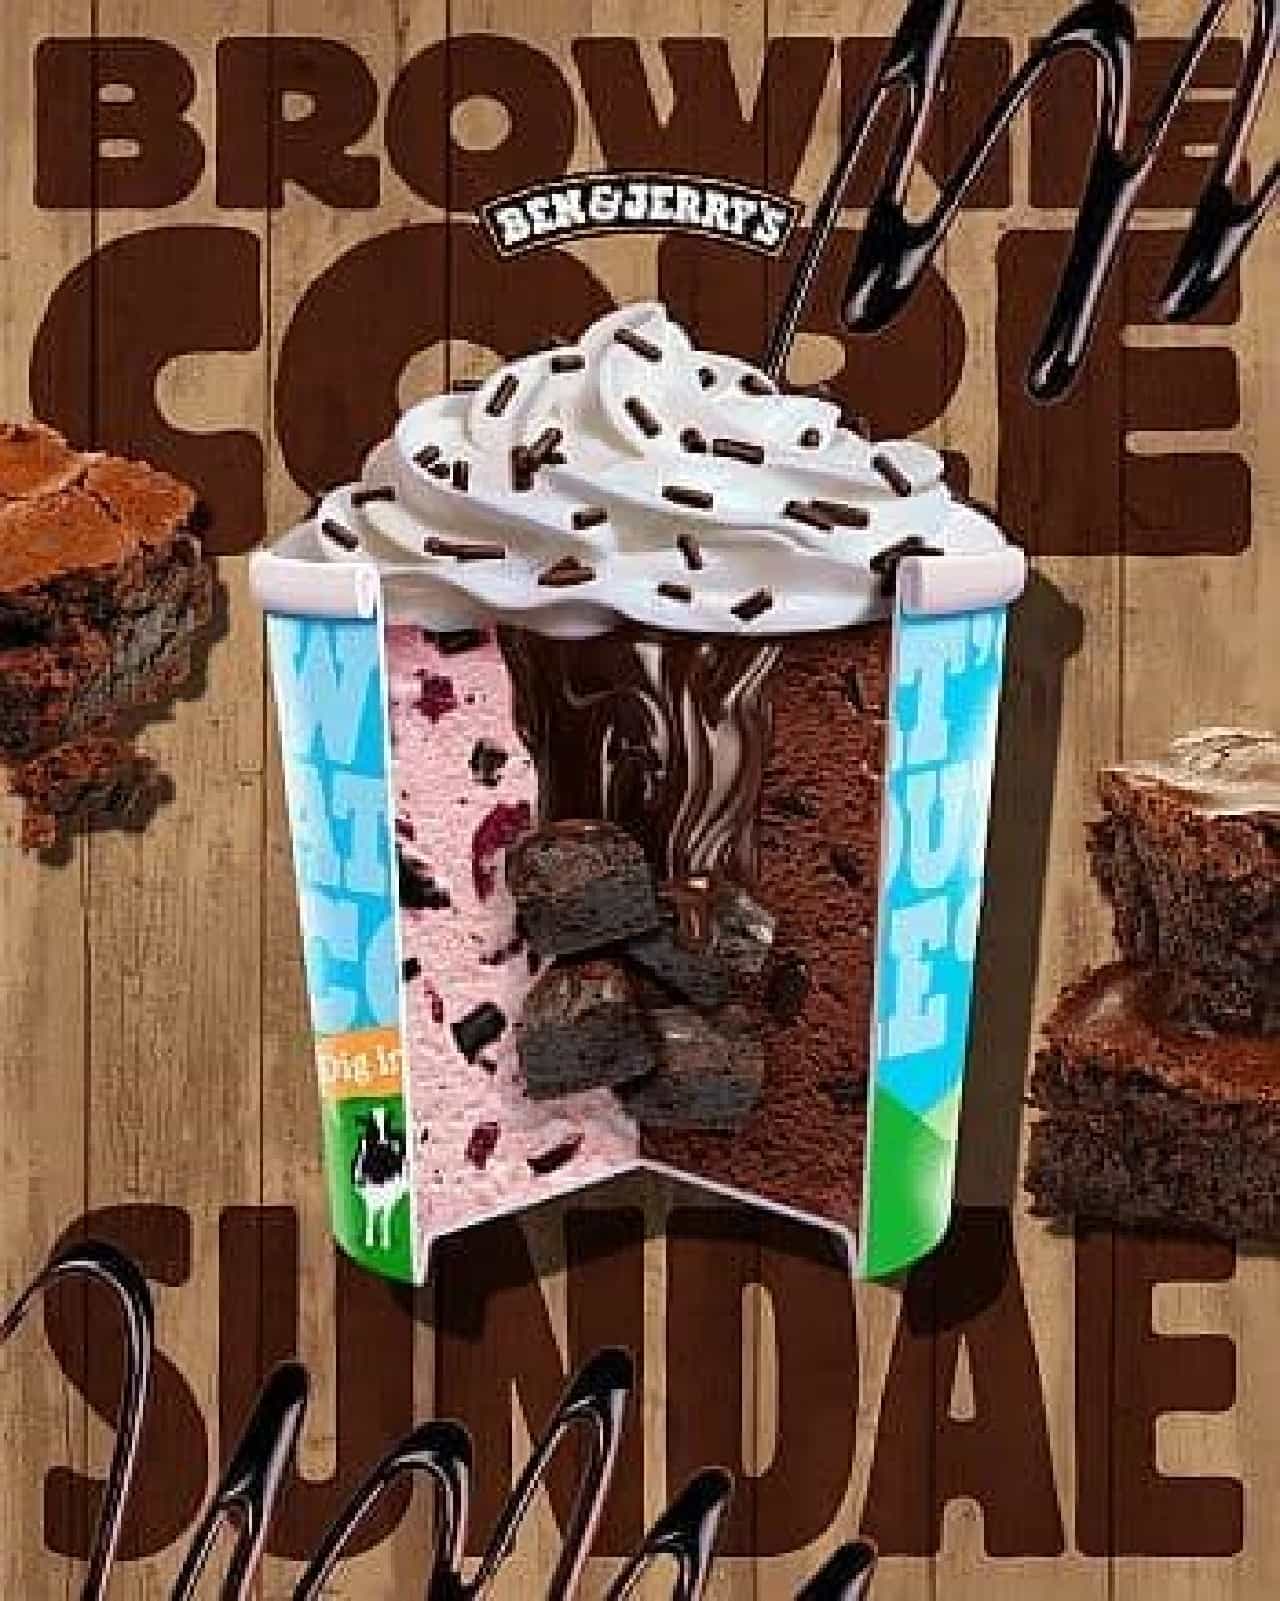 Ben & Jerry's "Brownie Core Sunday"